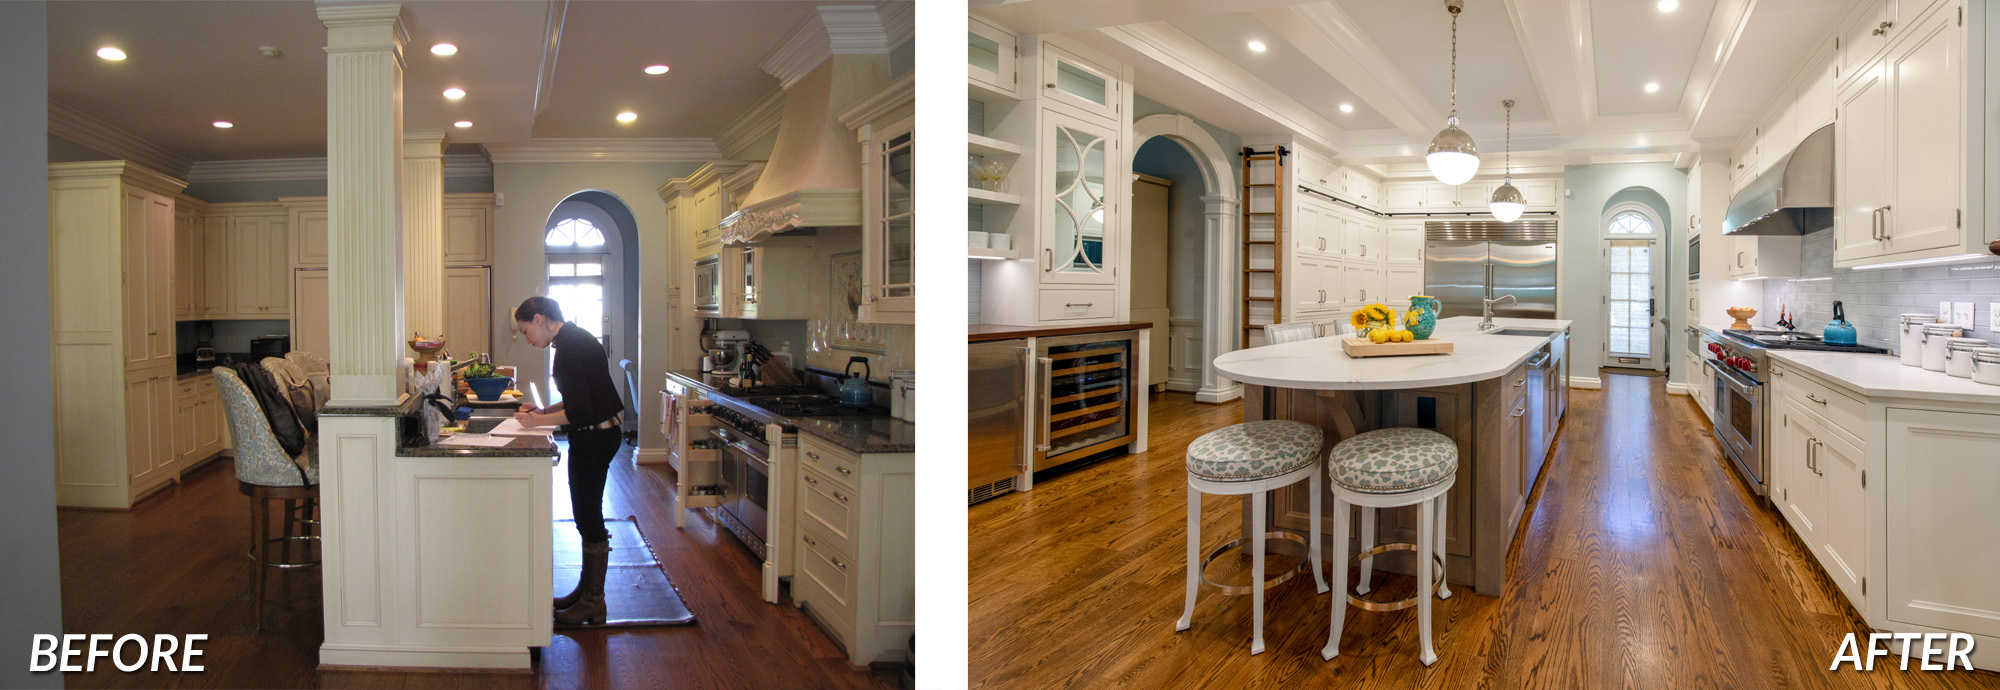 BOWA Design Design Build - Chevy Chase Kitchen Renovation Before & After